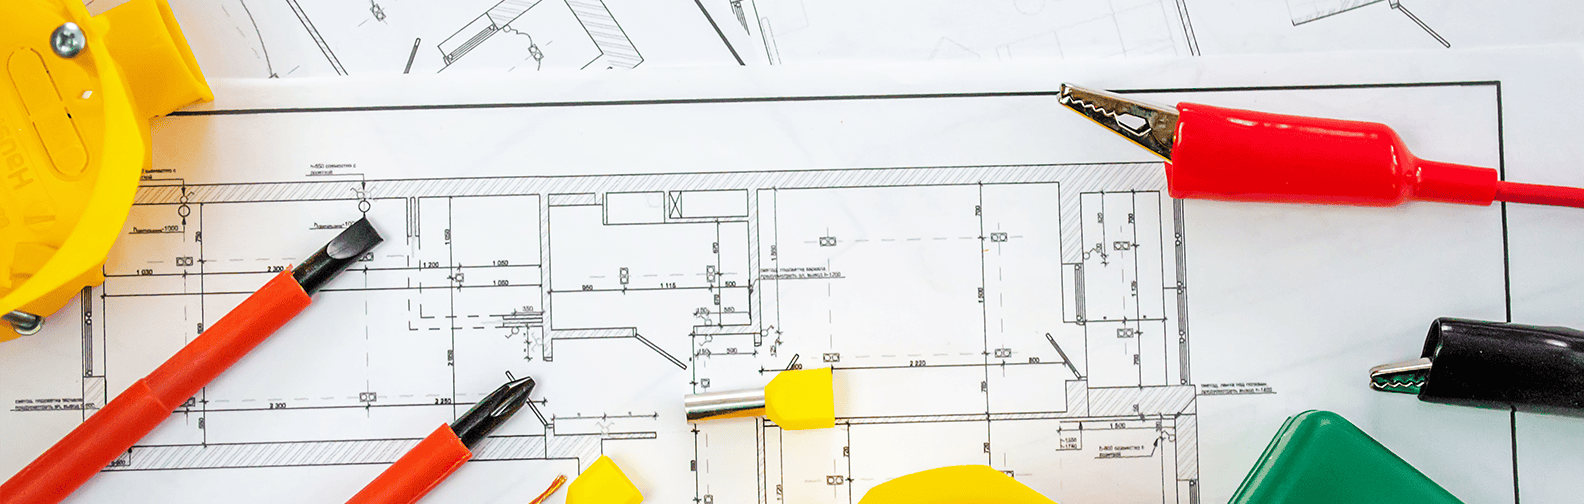 commercial electrical blueprint